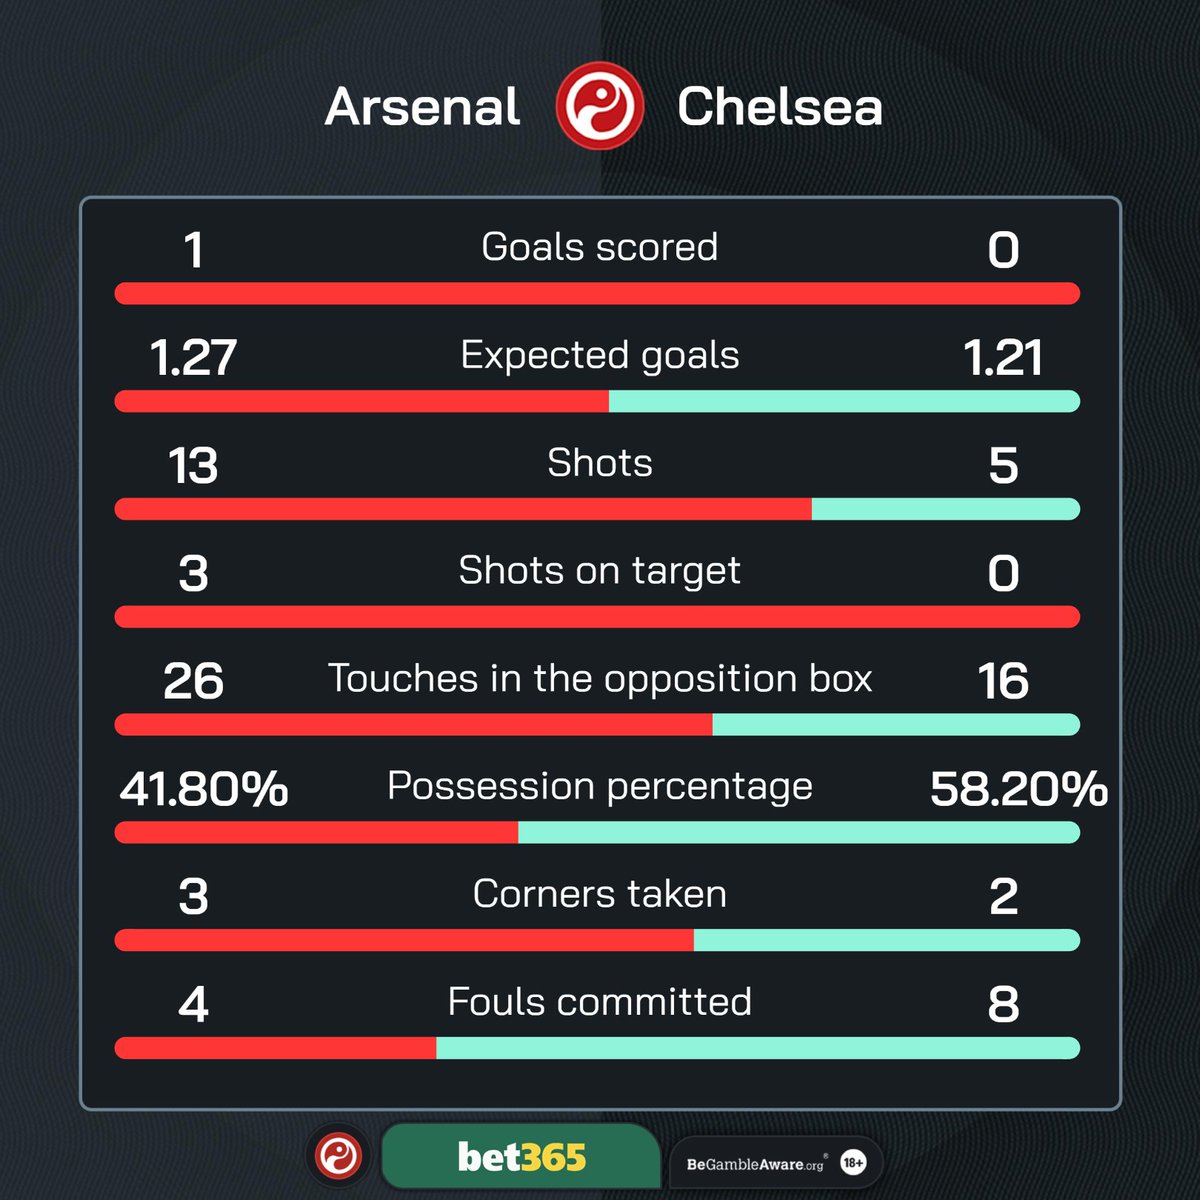 HT: Arsenal 1-0 Chelsea Arsenal had 13 shots in the opening 45 minutes, their most on record (since 2003-04) in the first half of a Premier League game against Chelsea. #ARSCHE | @bet365 | #Ad